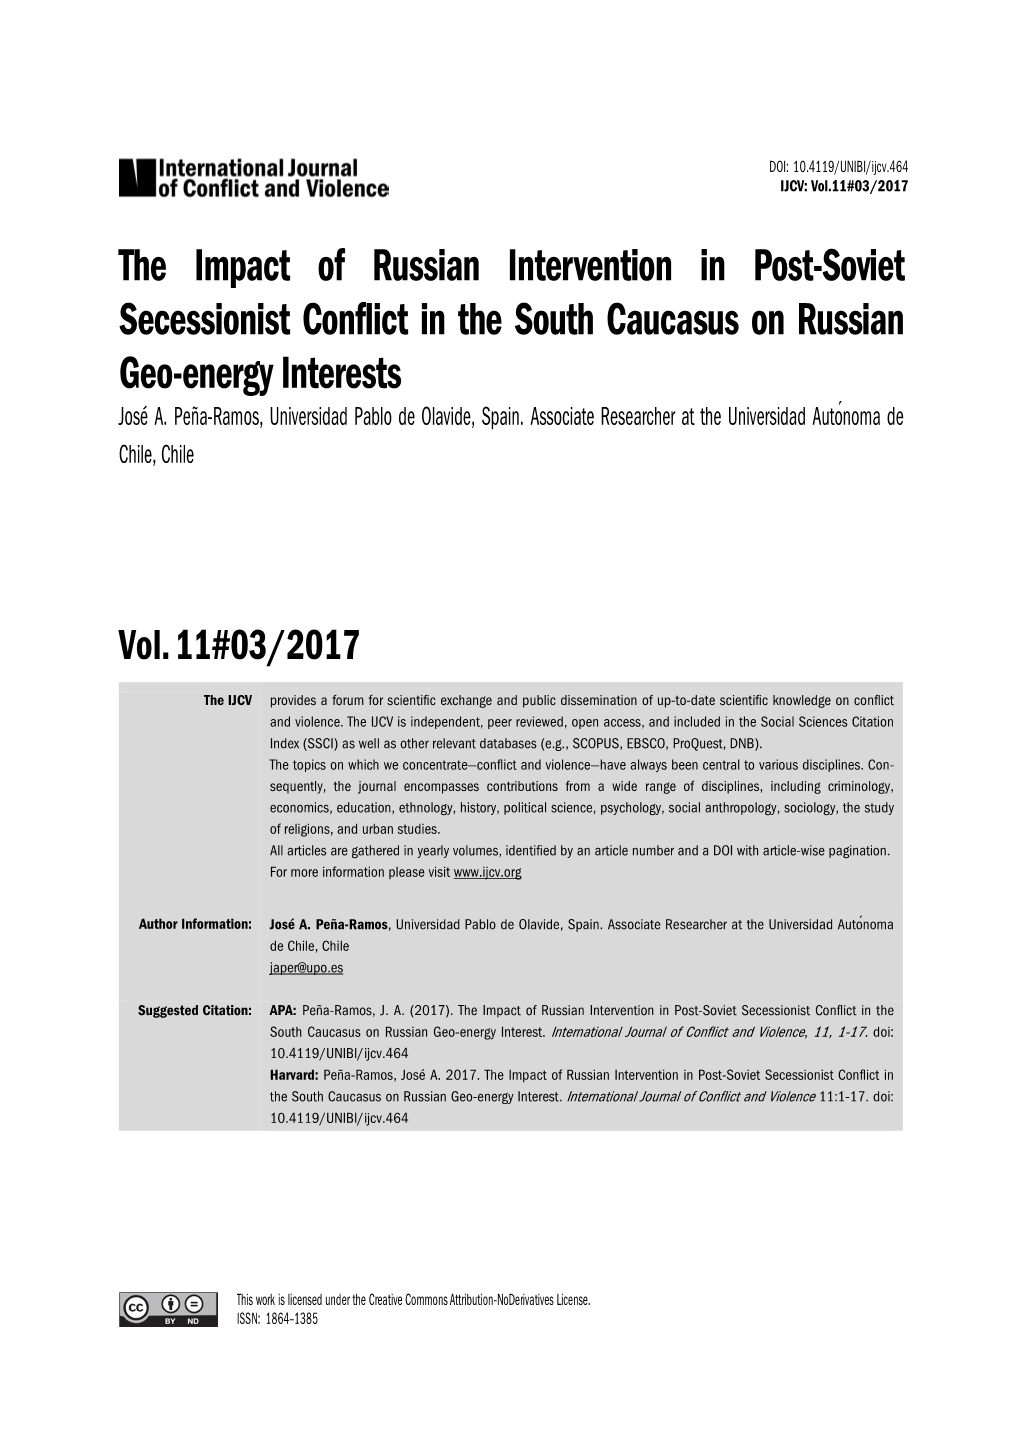 The Impact of Russian Intervention in Post-Soviet Secessionist Conflict in the South Caucasus on Russian Geo-Energy Interests José A